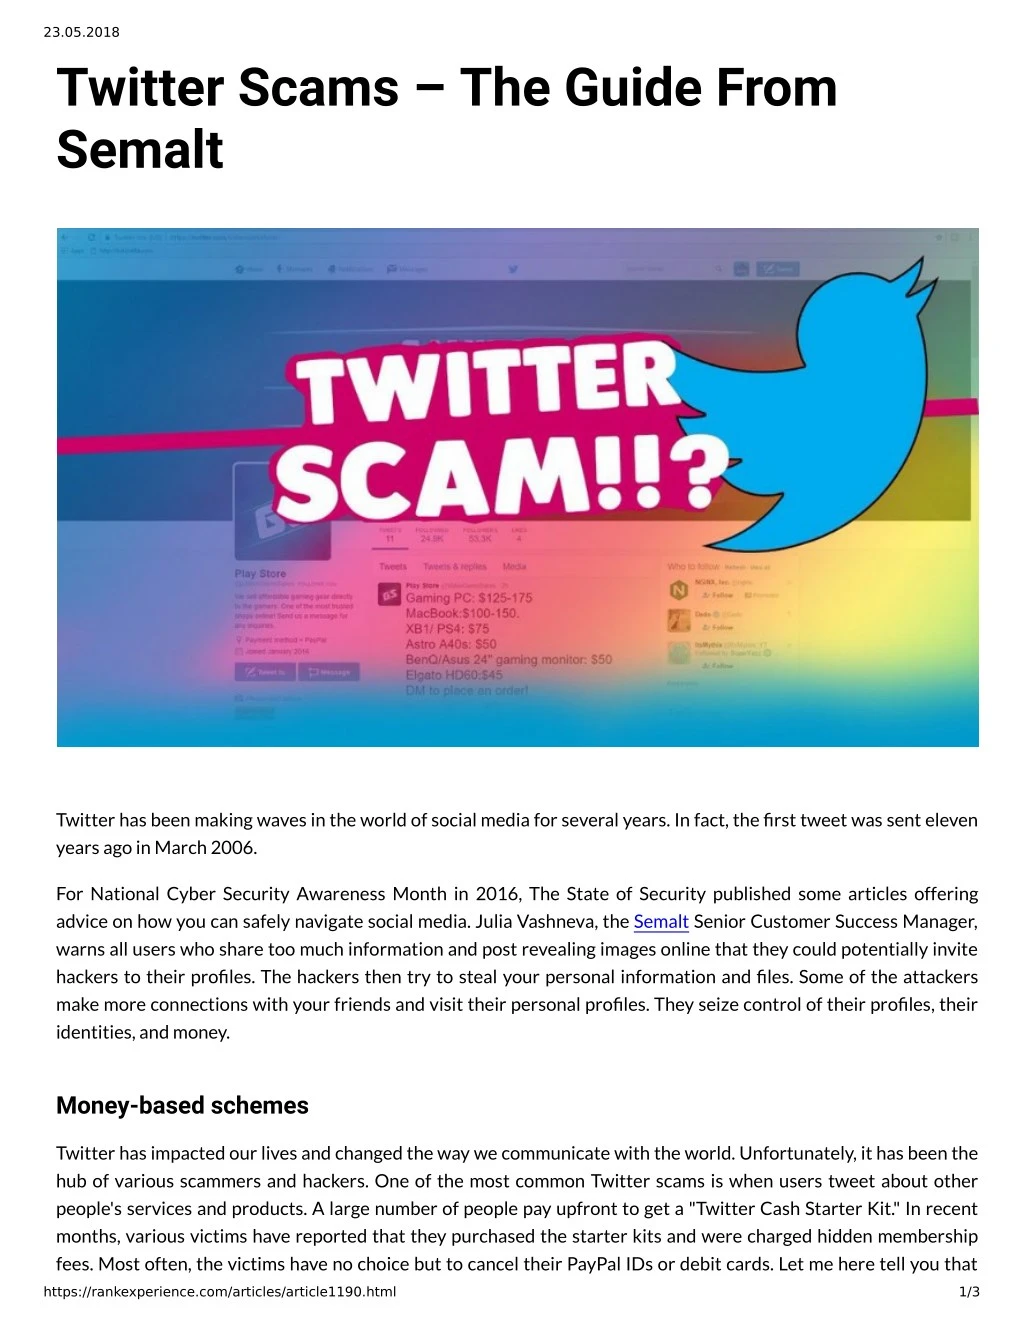 23 05 2018 twitter scams the guide from semalt